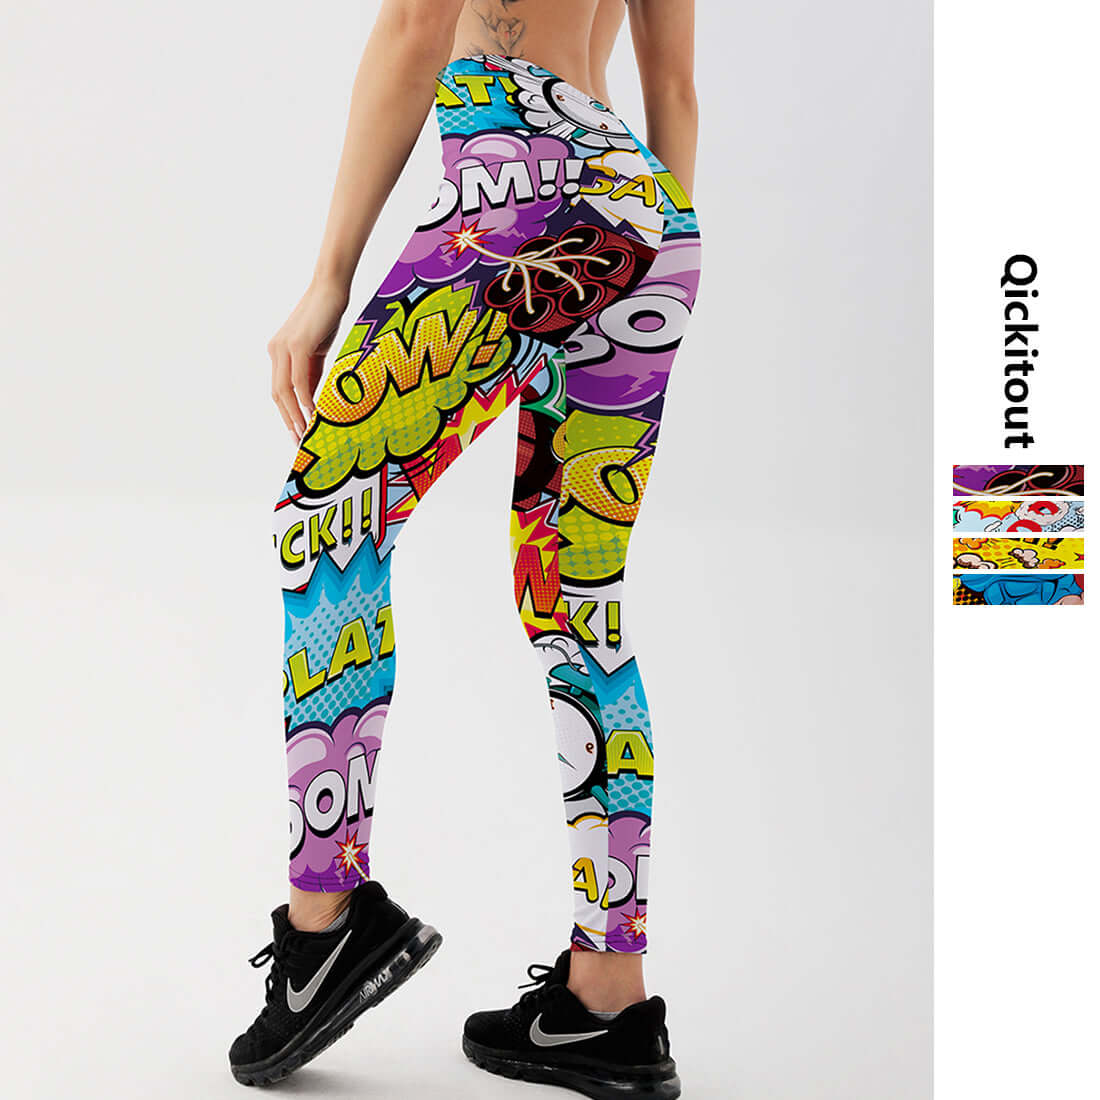 3d printed push up cartoon game fitness leggings yoga gym exercise tights women's sportswear activewear